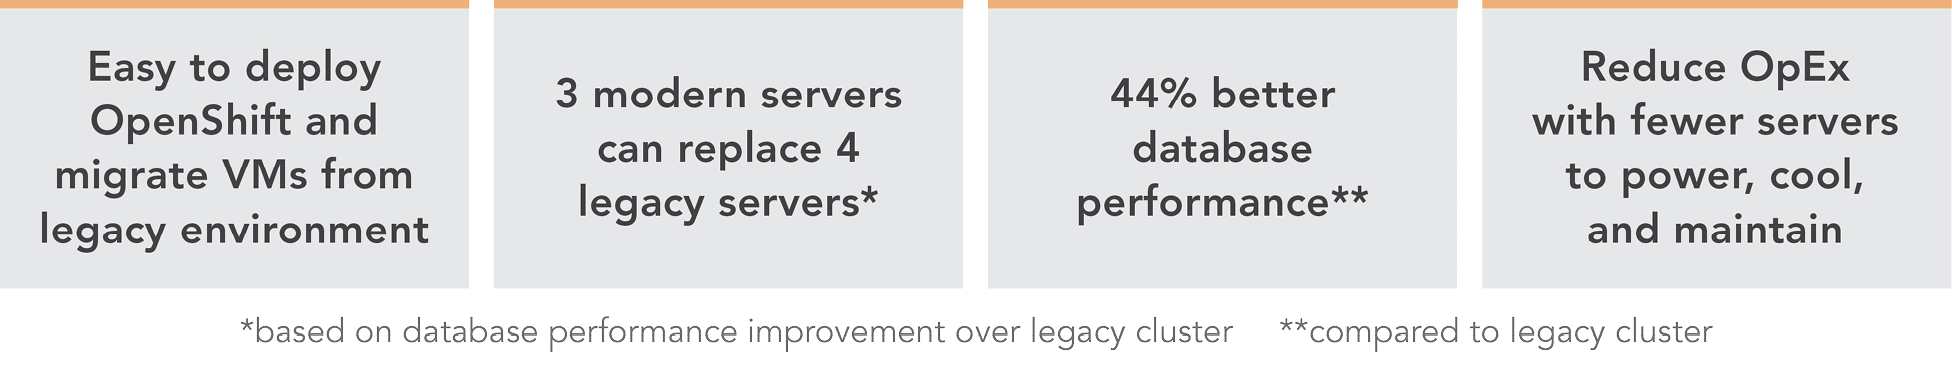 This image makes four claims: (1) Easy to deploy OpenShift and migrate VMs from legacy environment, (2) 3 modern servers can replace 4 legacy servers based on database performance improvement over legacy cluster, (3) 44% better database performance compared to legacy cluster, and (4) Reduce OpEx with fewer servers to power, cool, and maintain.